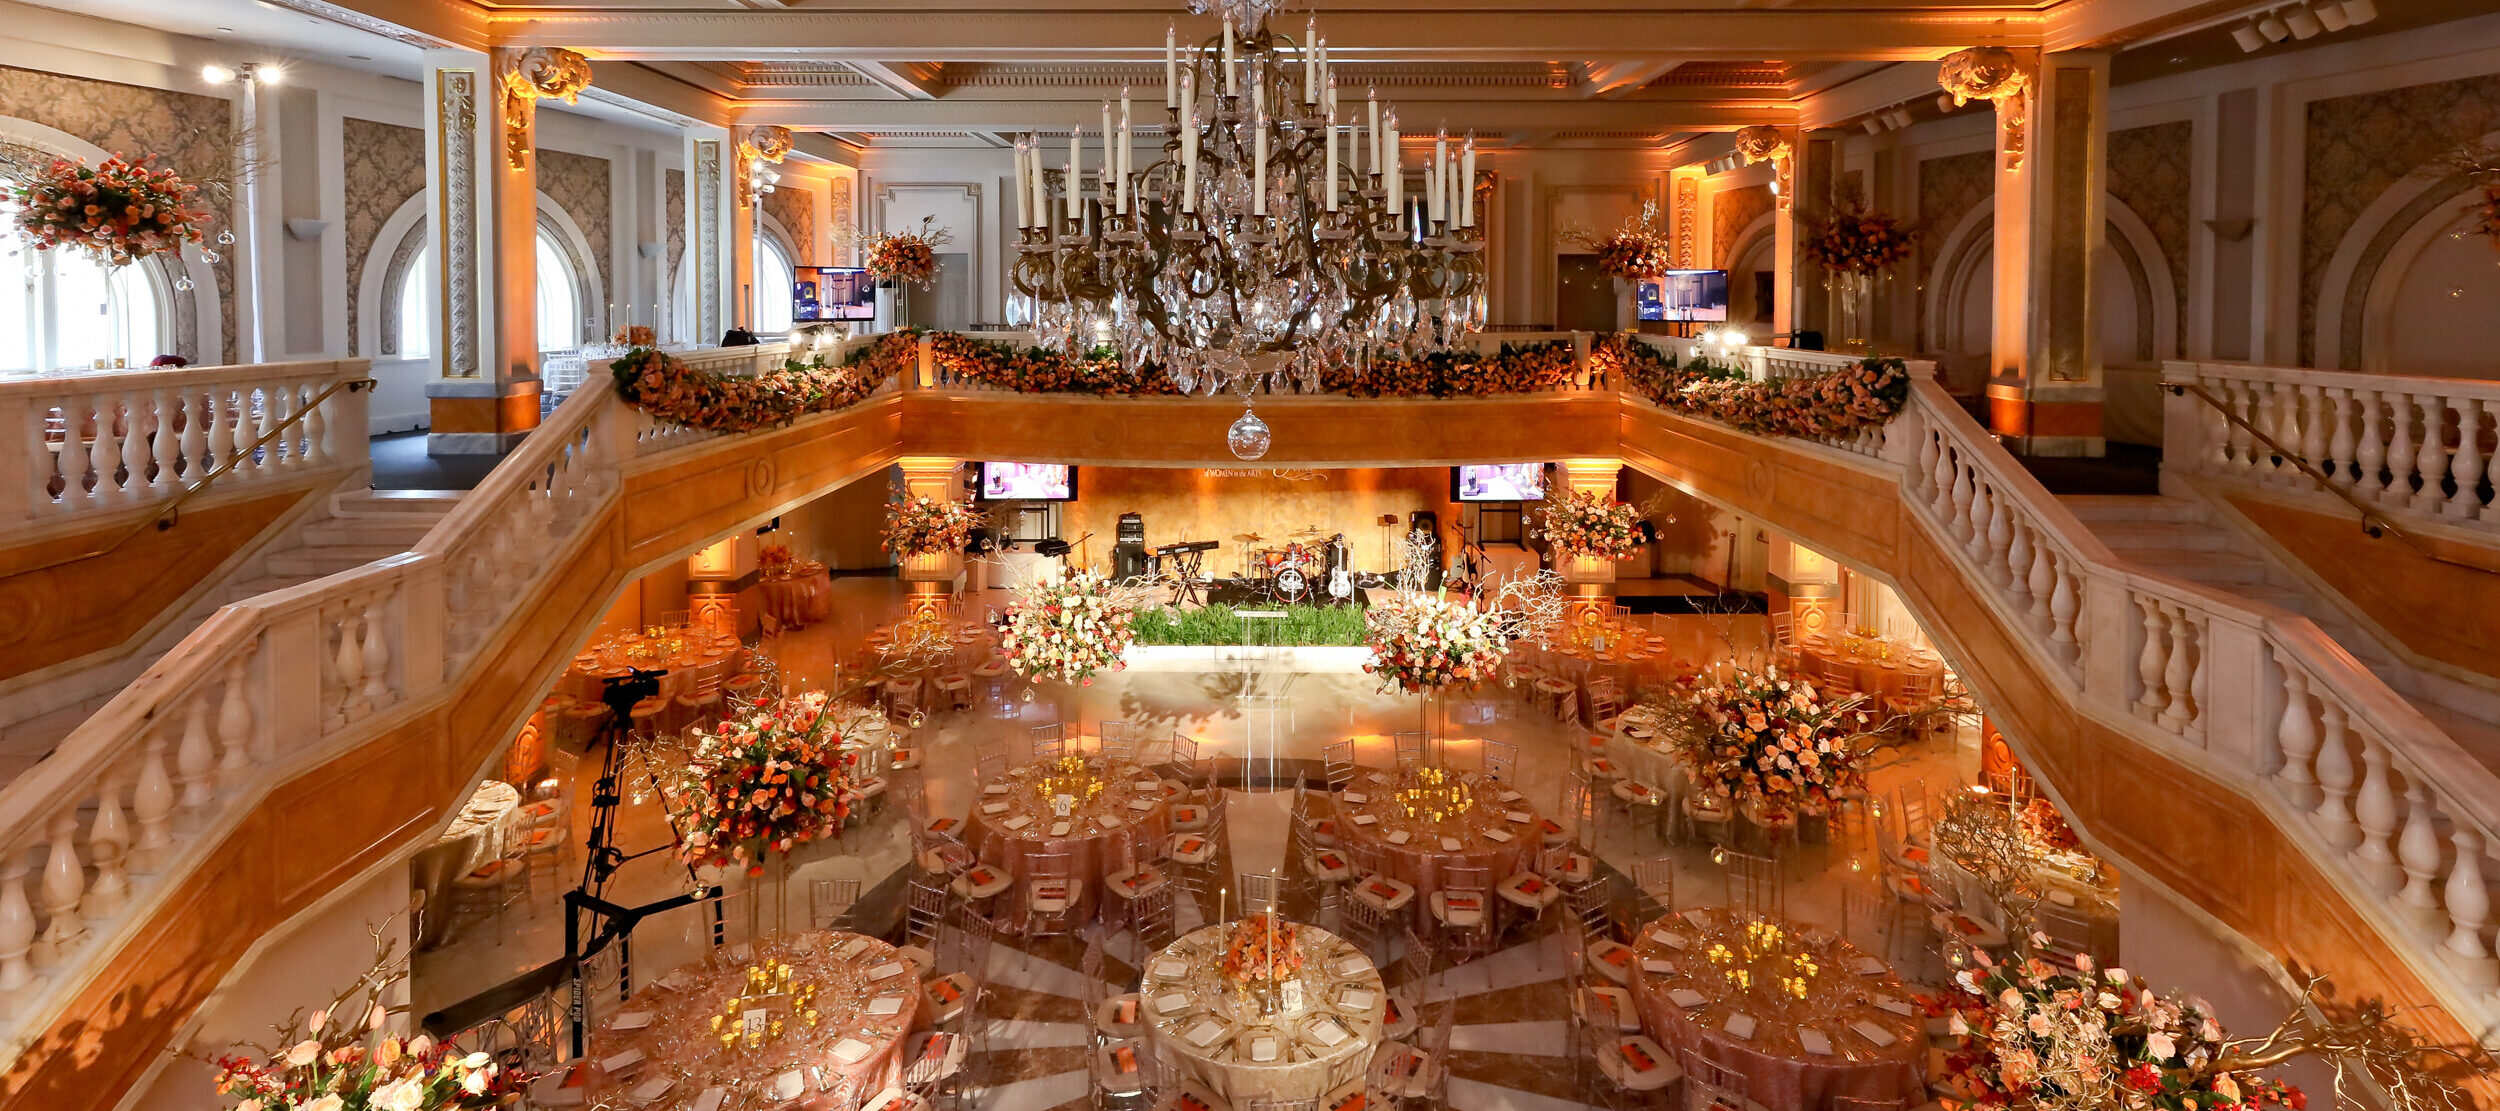 A large two story great hall with a grand staircase and elaborate chandelier, decorated with large floral displays and elegant table settings for a fundraising dinner.